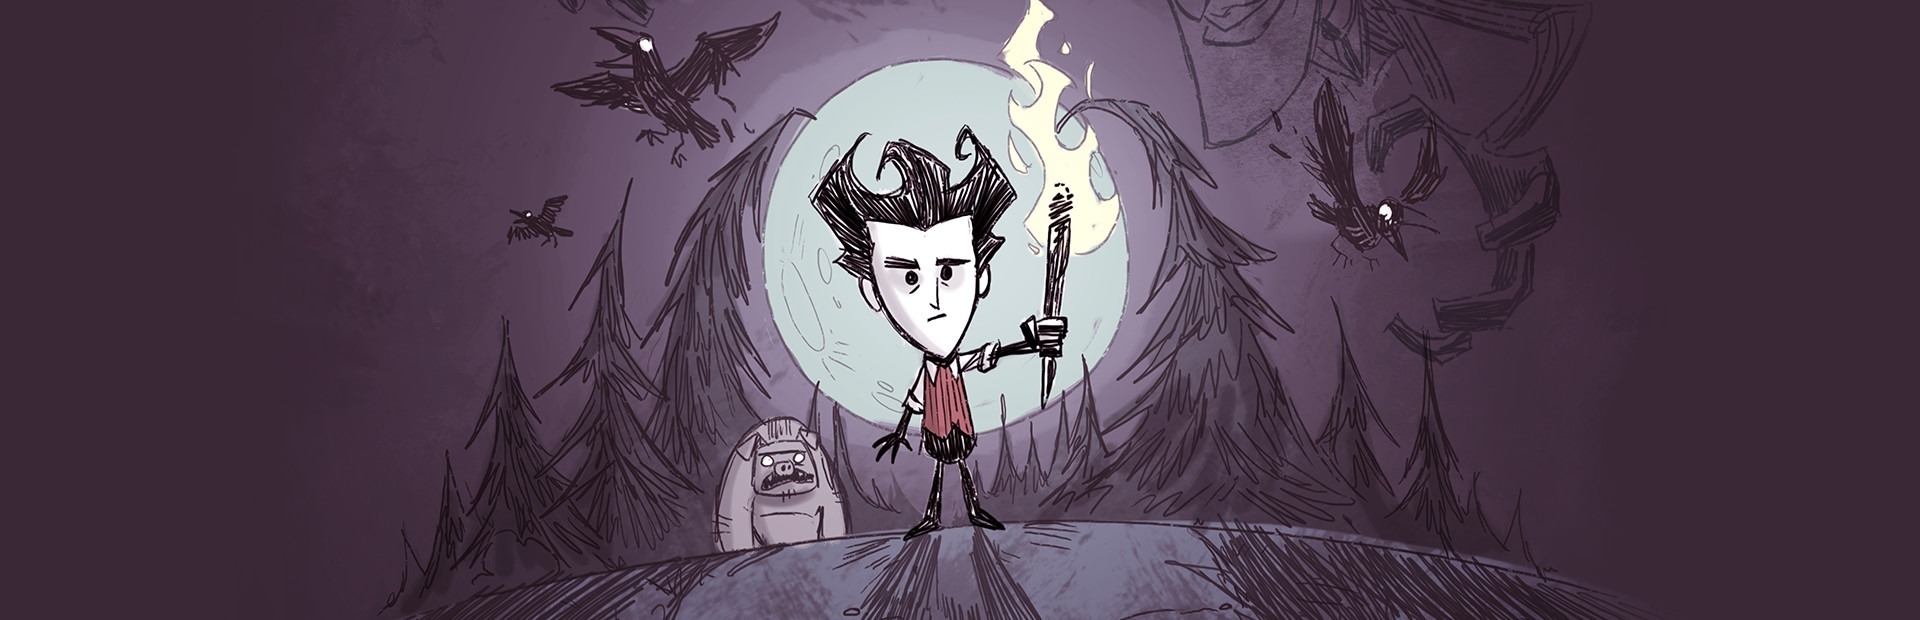 Ю донт фул. Шипы don't Starve together. Шапка донт старв. Don't Starve together шапки. Дон Стрейф тугеза.